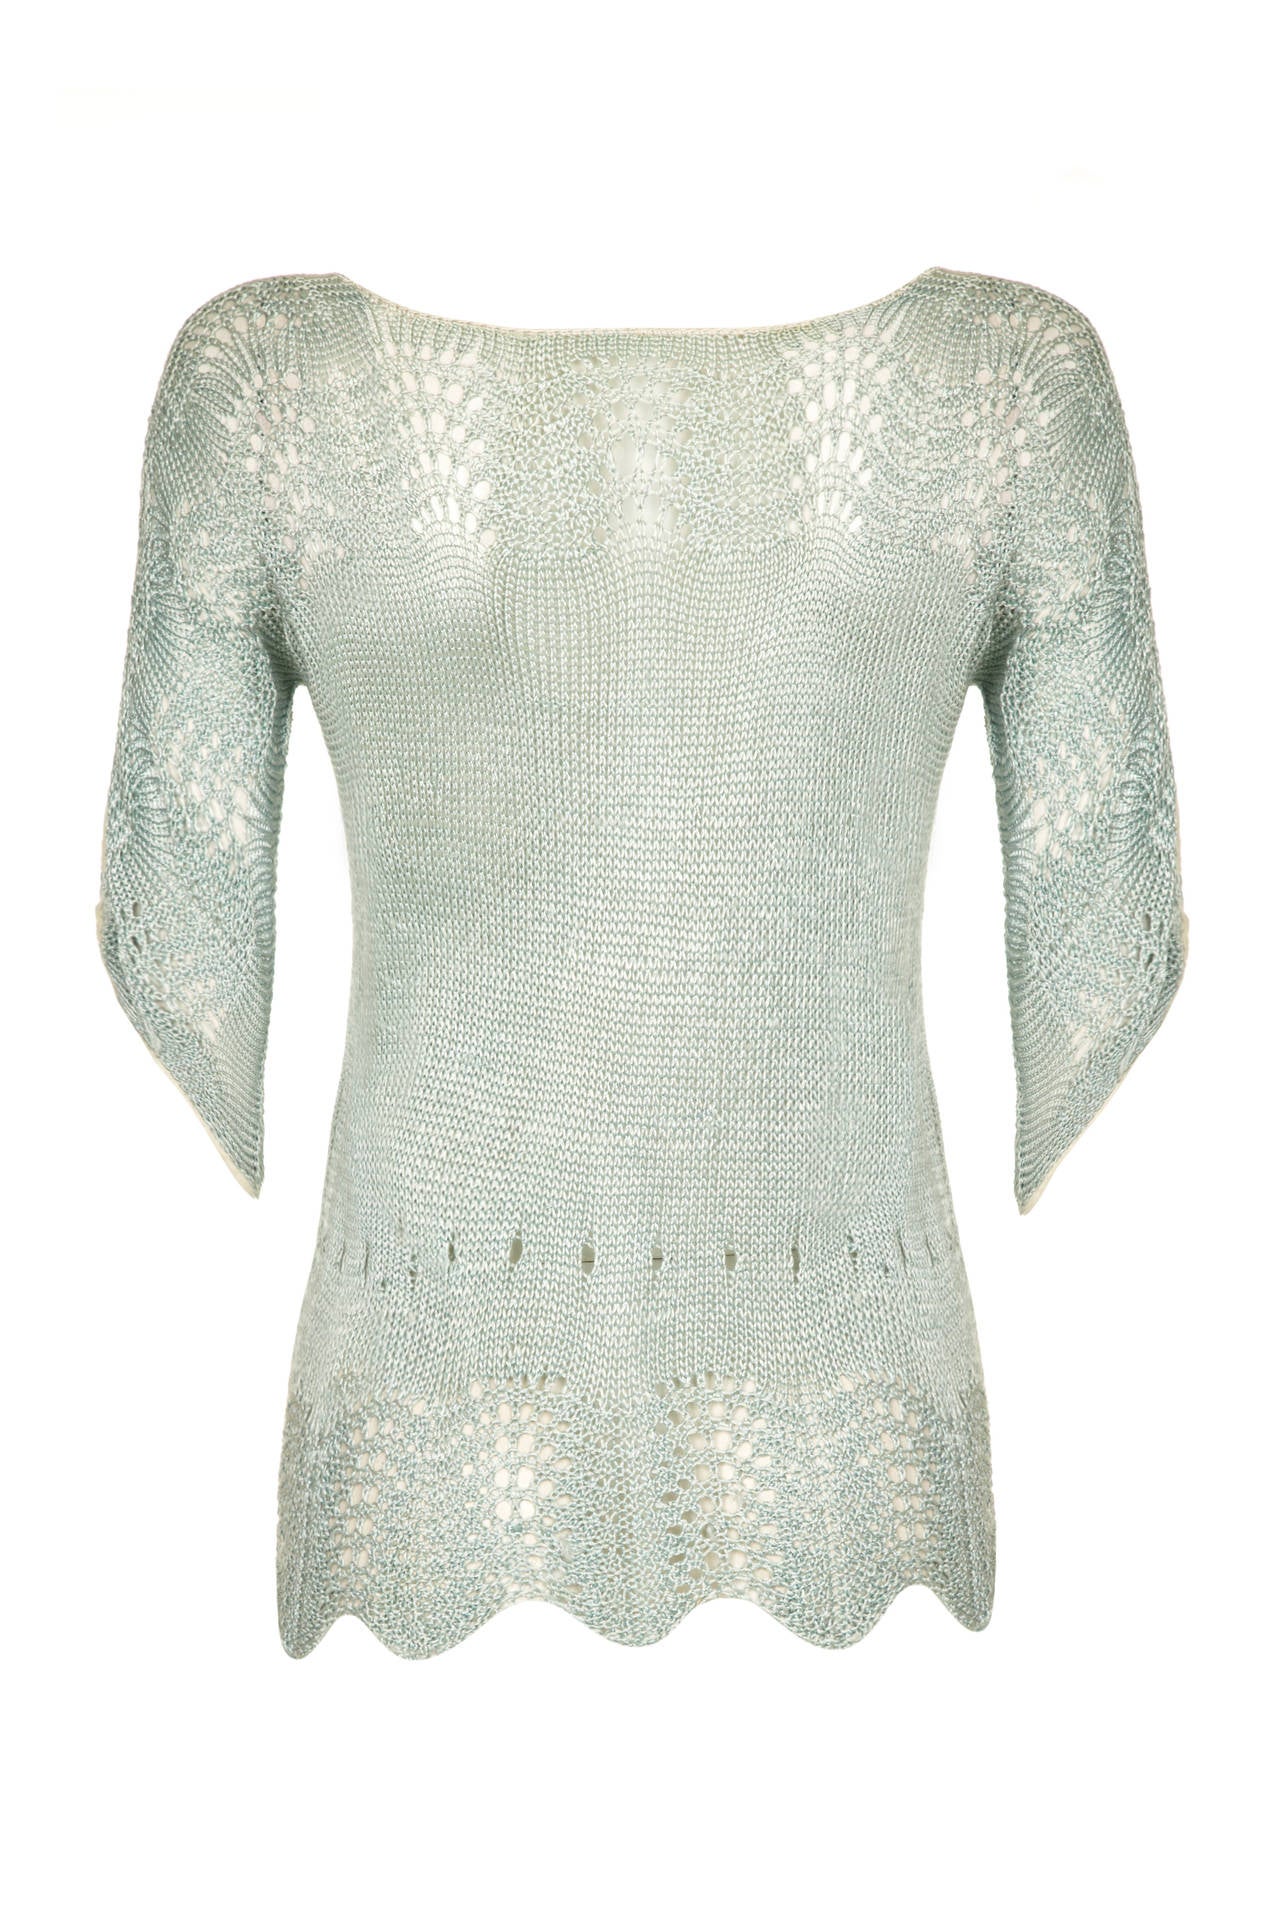 Beautiful vintage 1920s pale green fine knit and crochet mix top featuring an intricate pattern throughout and cream edging around the neckline, sleeves and cuffs. The feminine ¾ sleeves are tapered to a point at the cuff  and the hem of the piece